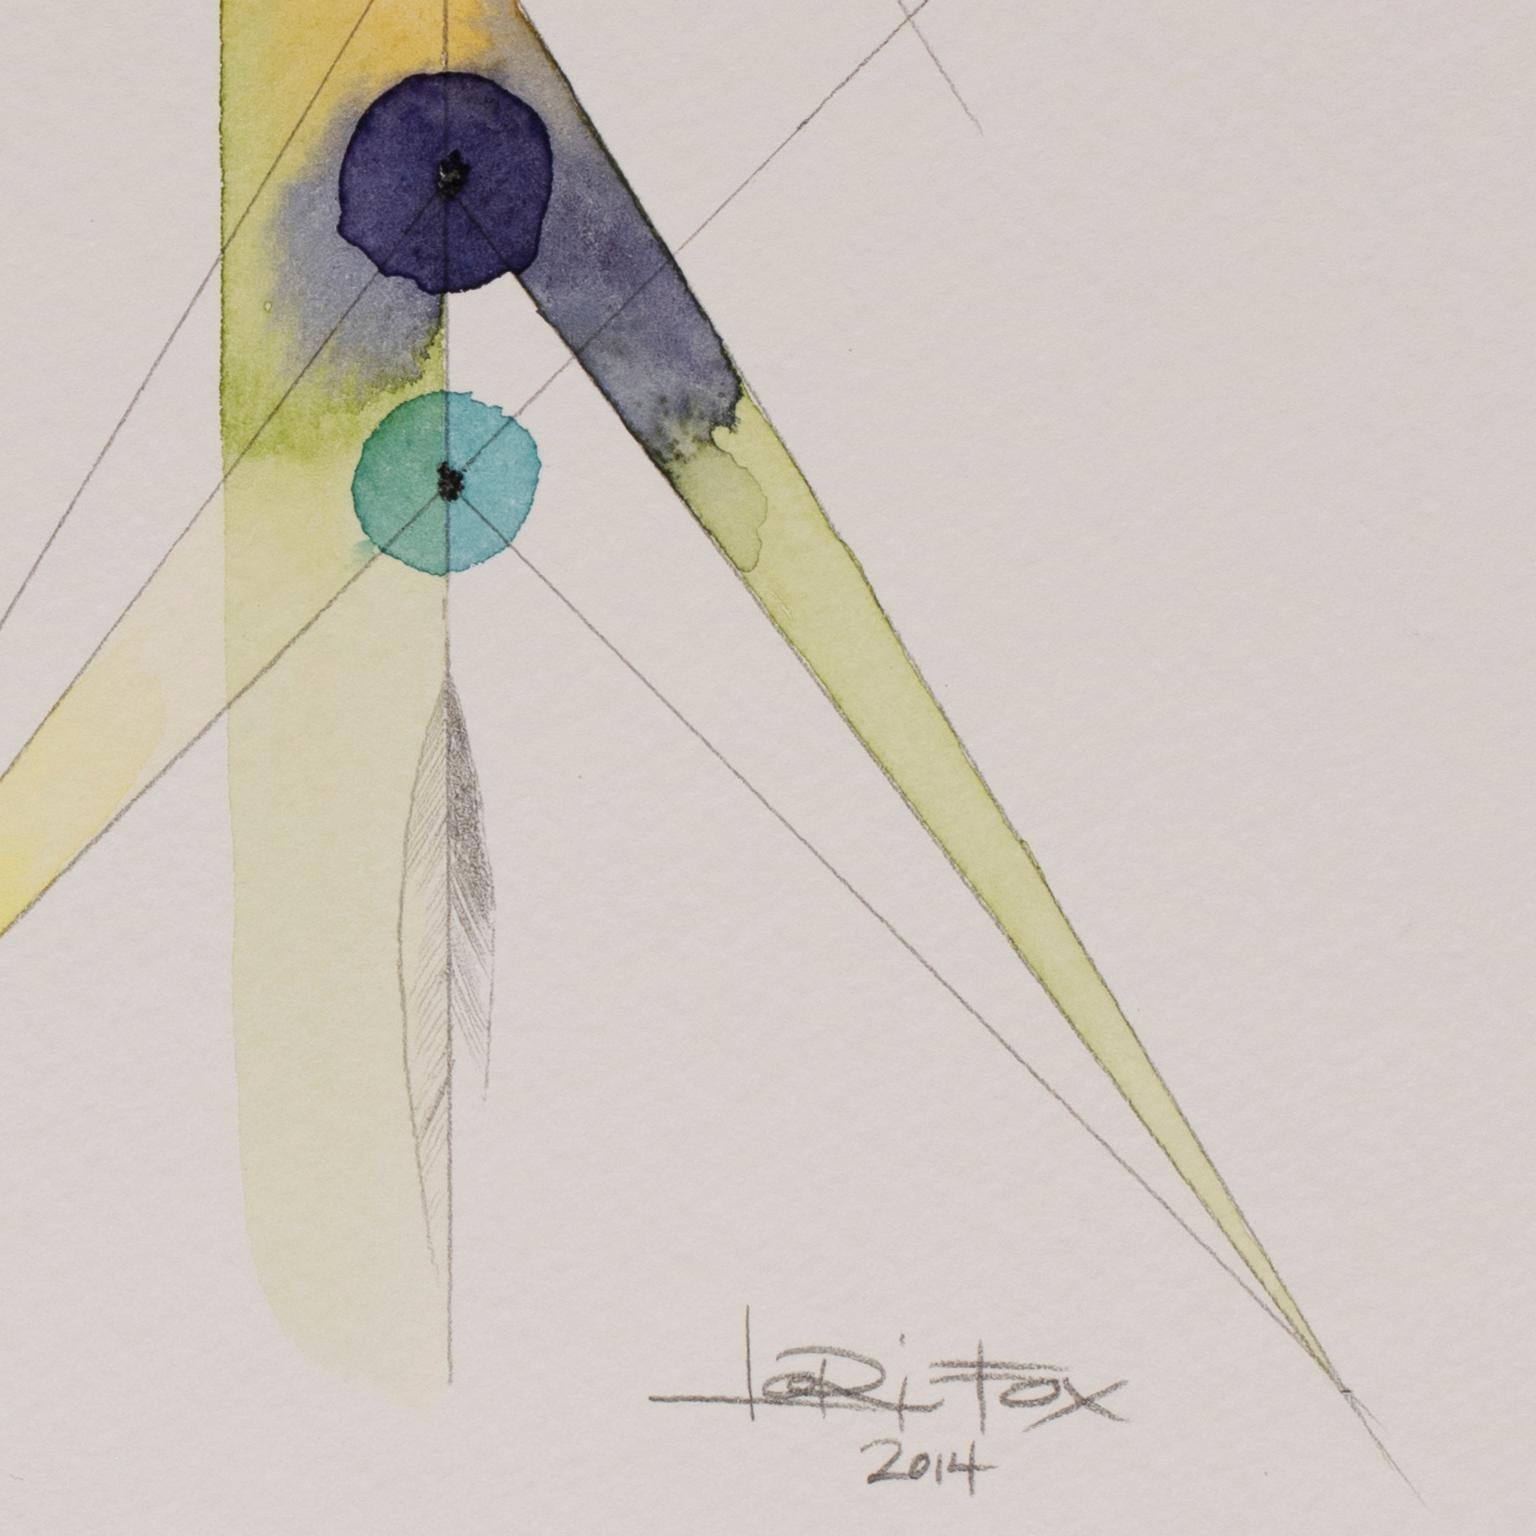 Totem 2.002 by Lori Fox. Blue, yellow abstract watercolor and graphite on paper 2